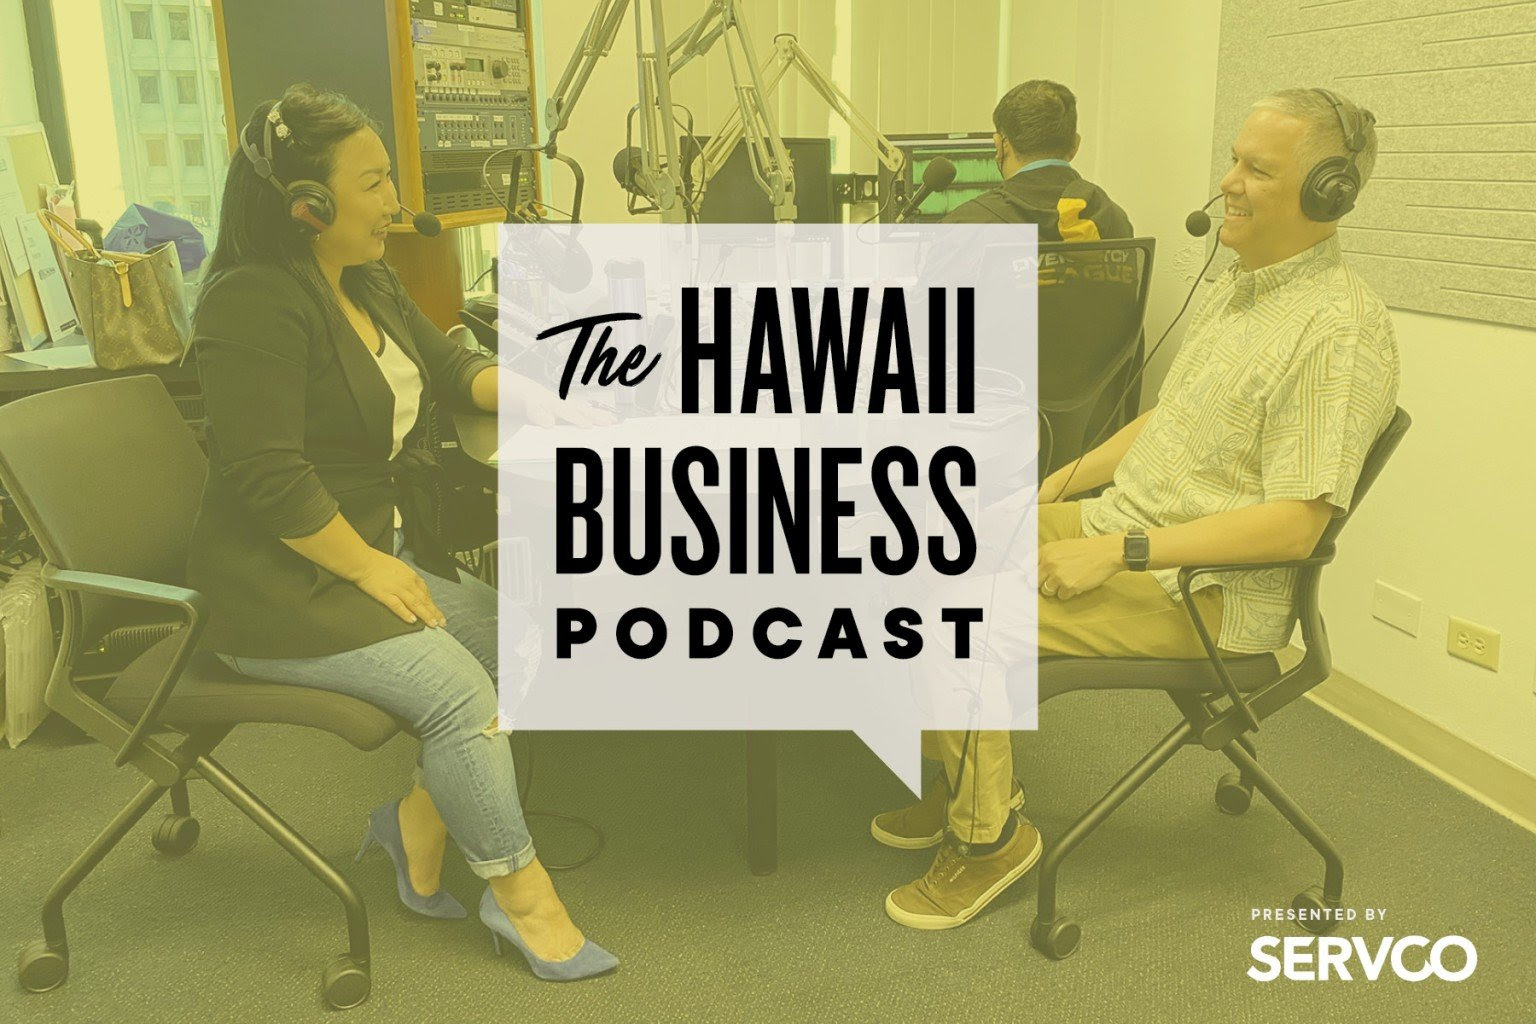 Click here to listen to the first episode of The Hawaii Business Podcast!